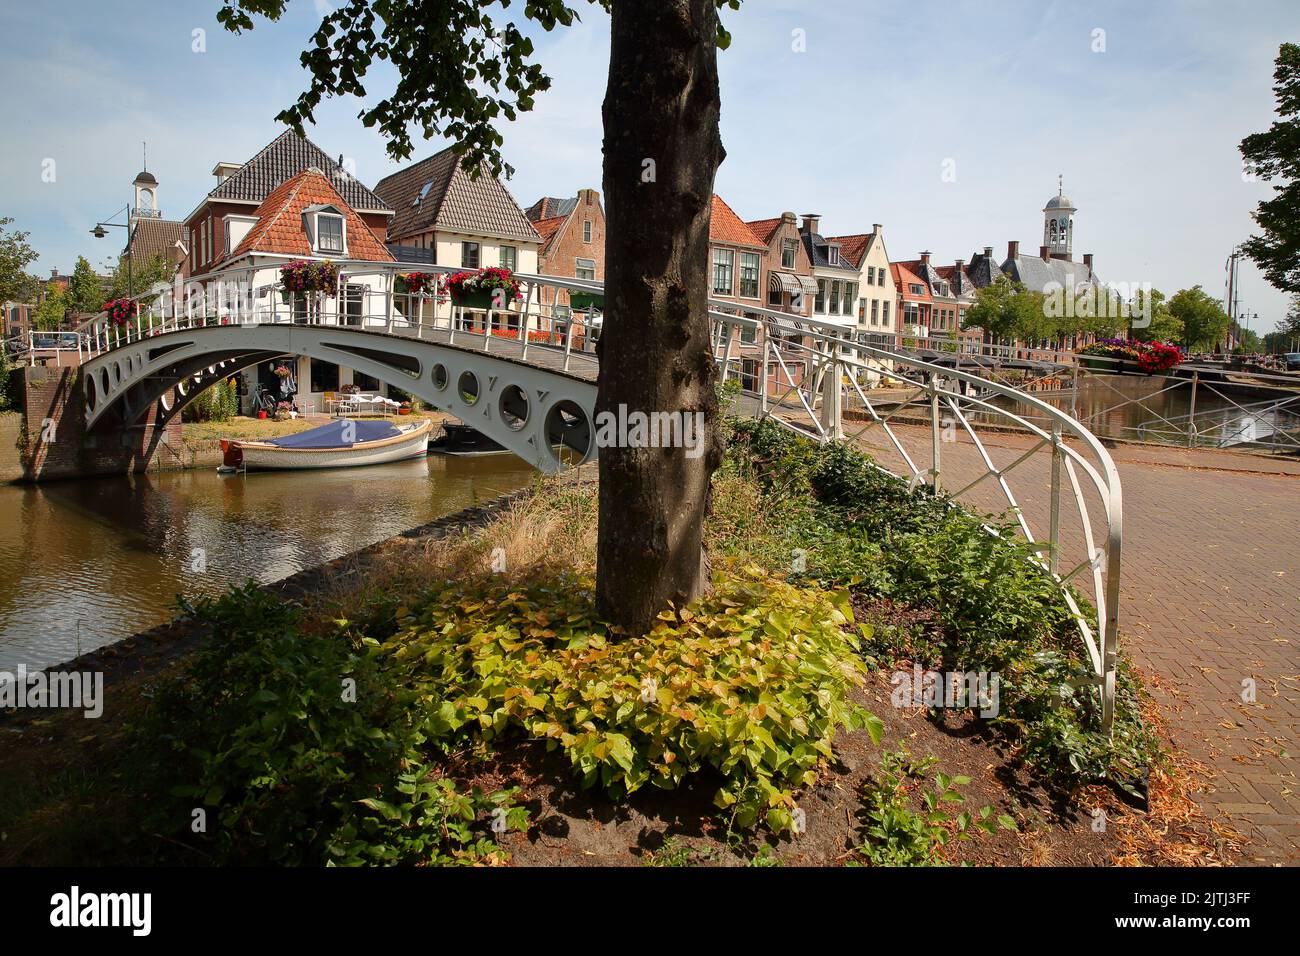 The little canal (klein Diep) and Turfmarkt footbridge in Dokkum, Friesland, Netherlands, with the Oud Stadhuis (Old town hall, built in 1610) Stock Photo